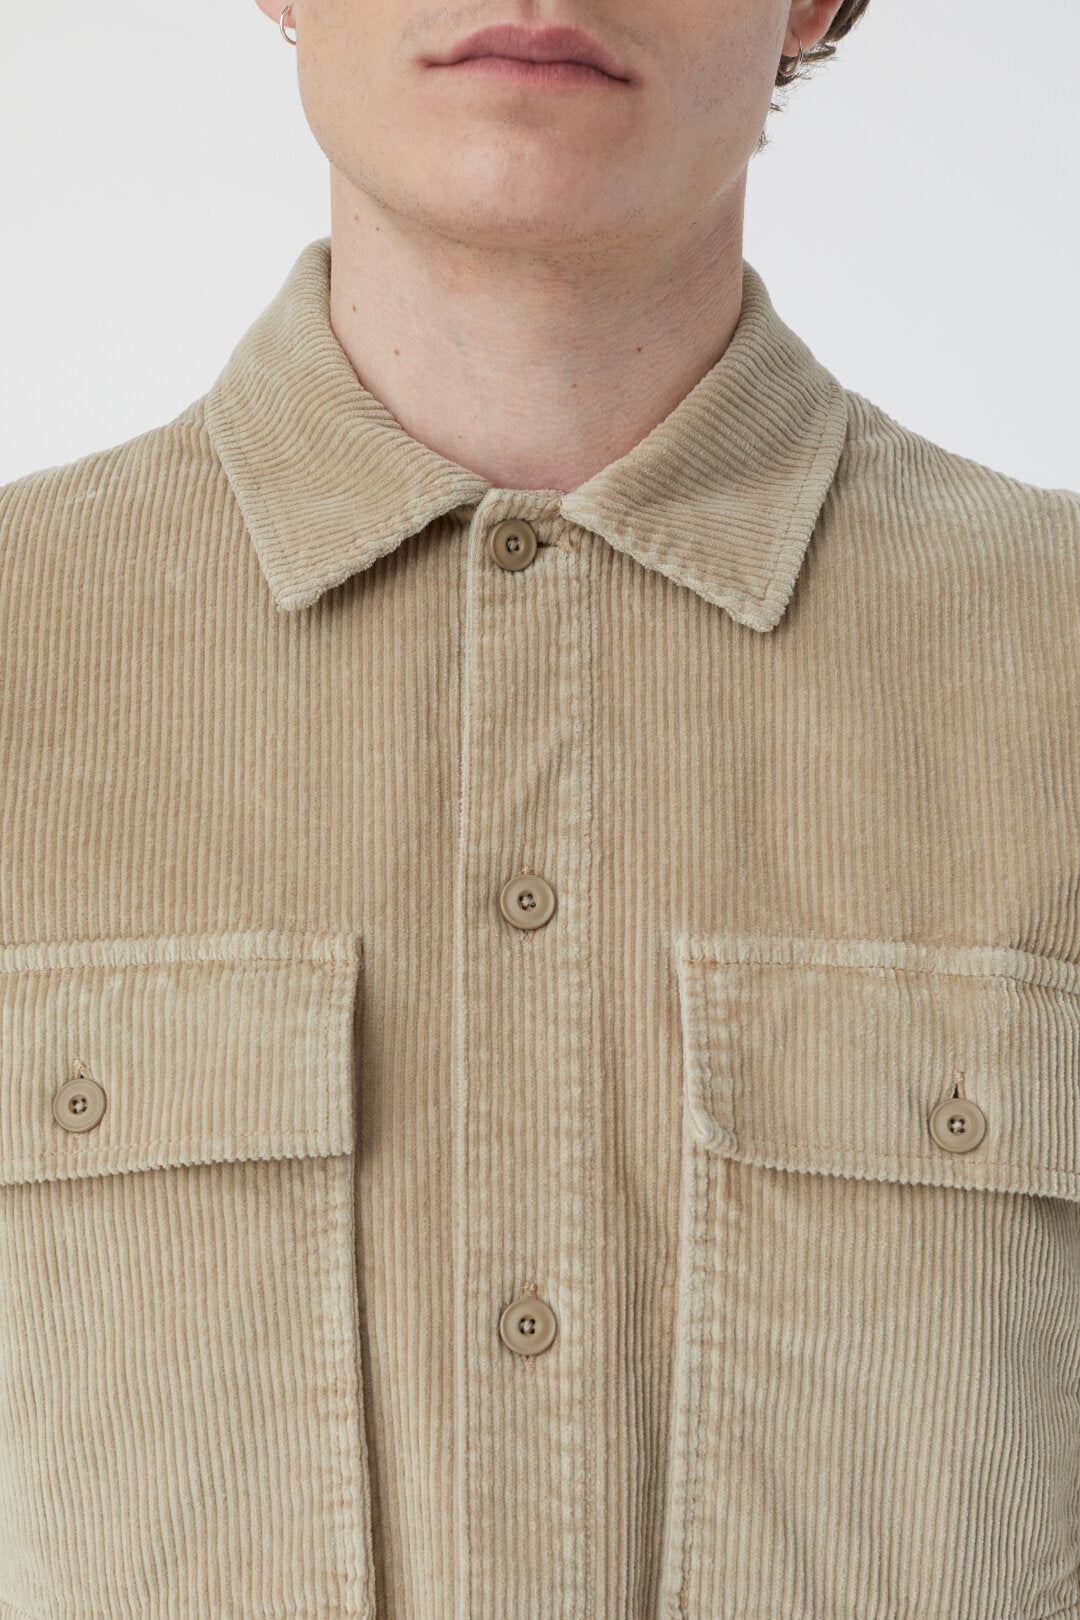 UTILITY SHIRT - BISCUIT